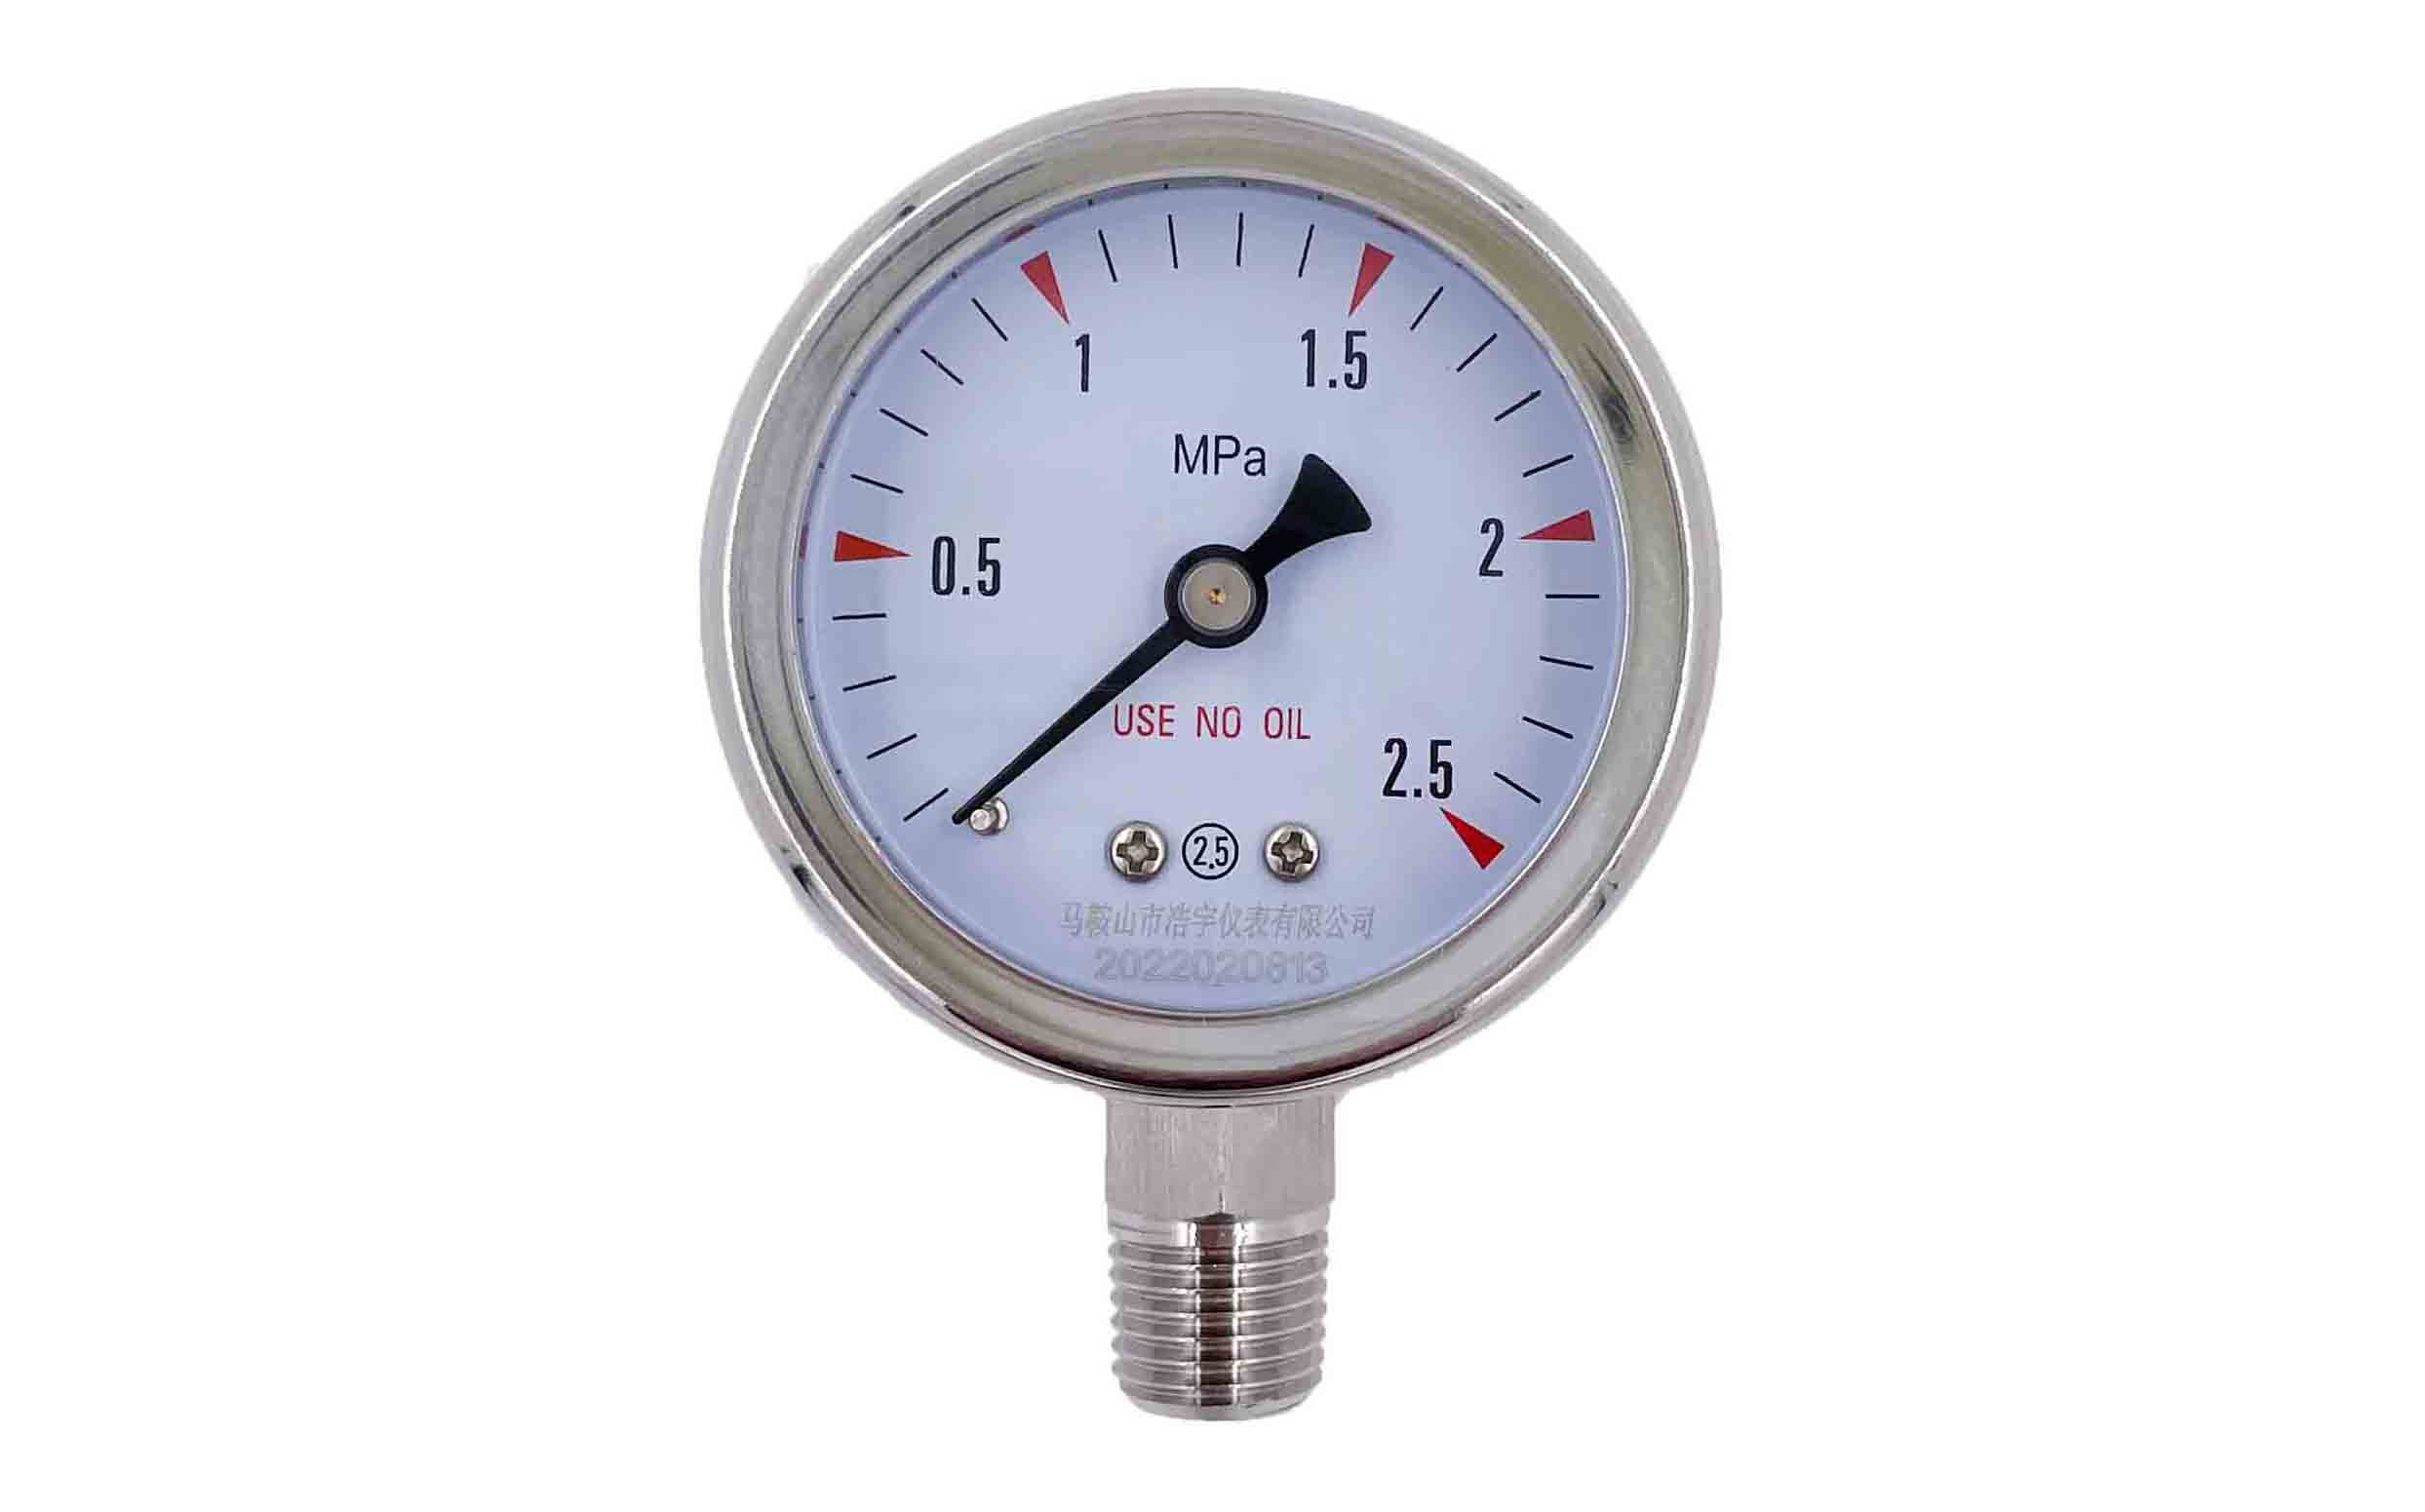 ESAB from Europe bought a batch of pressure gauges